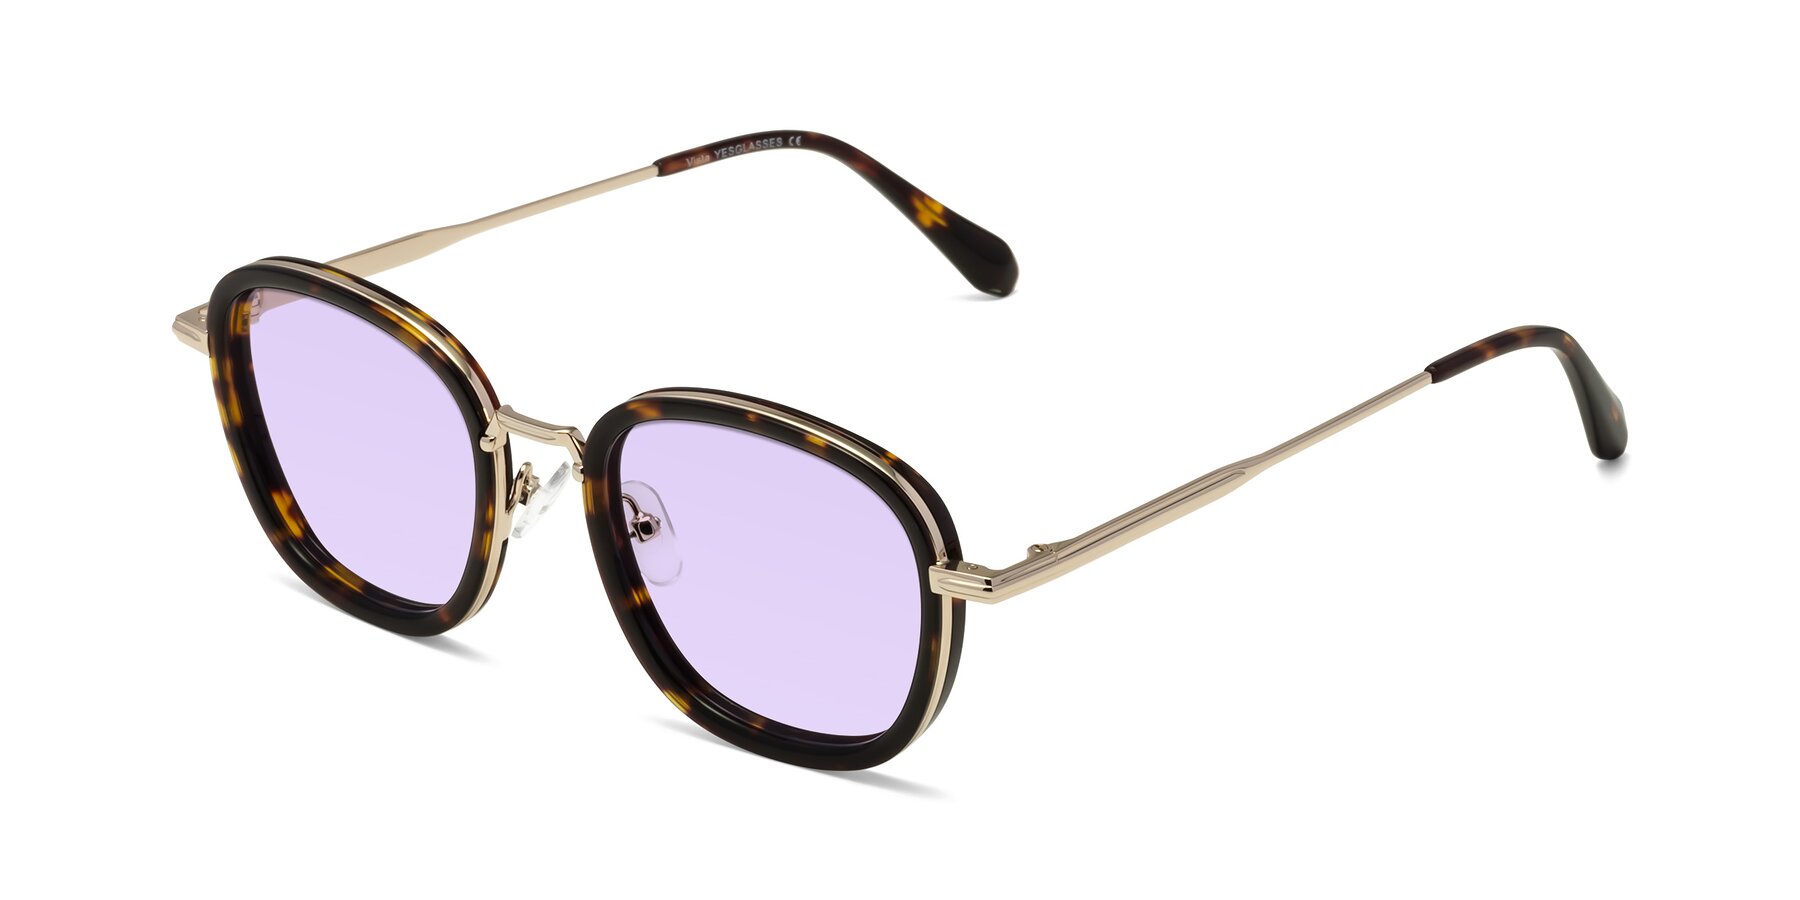 Angle of Vista in Tortoise-Light Gold with Light Purple Tinted Lenses